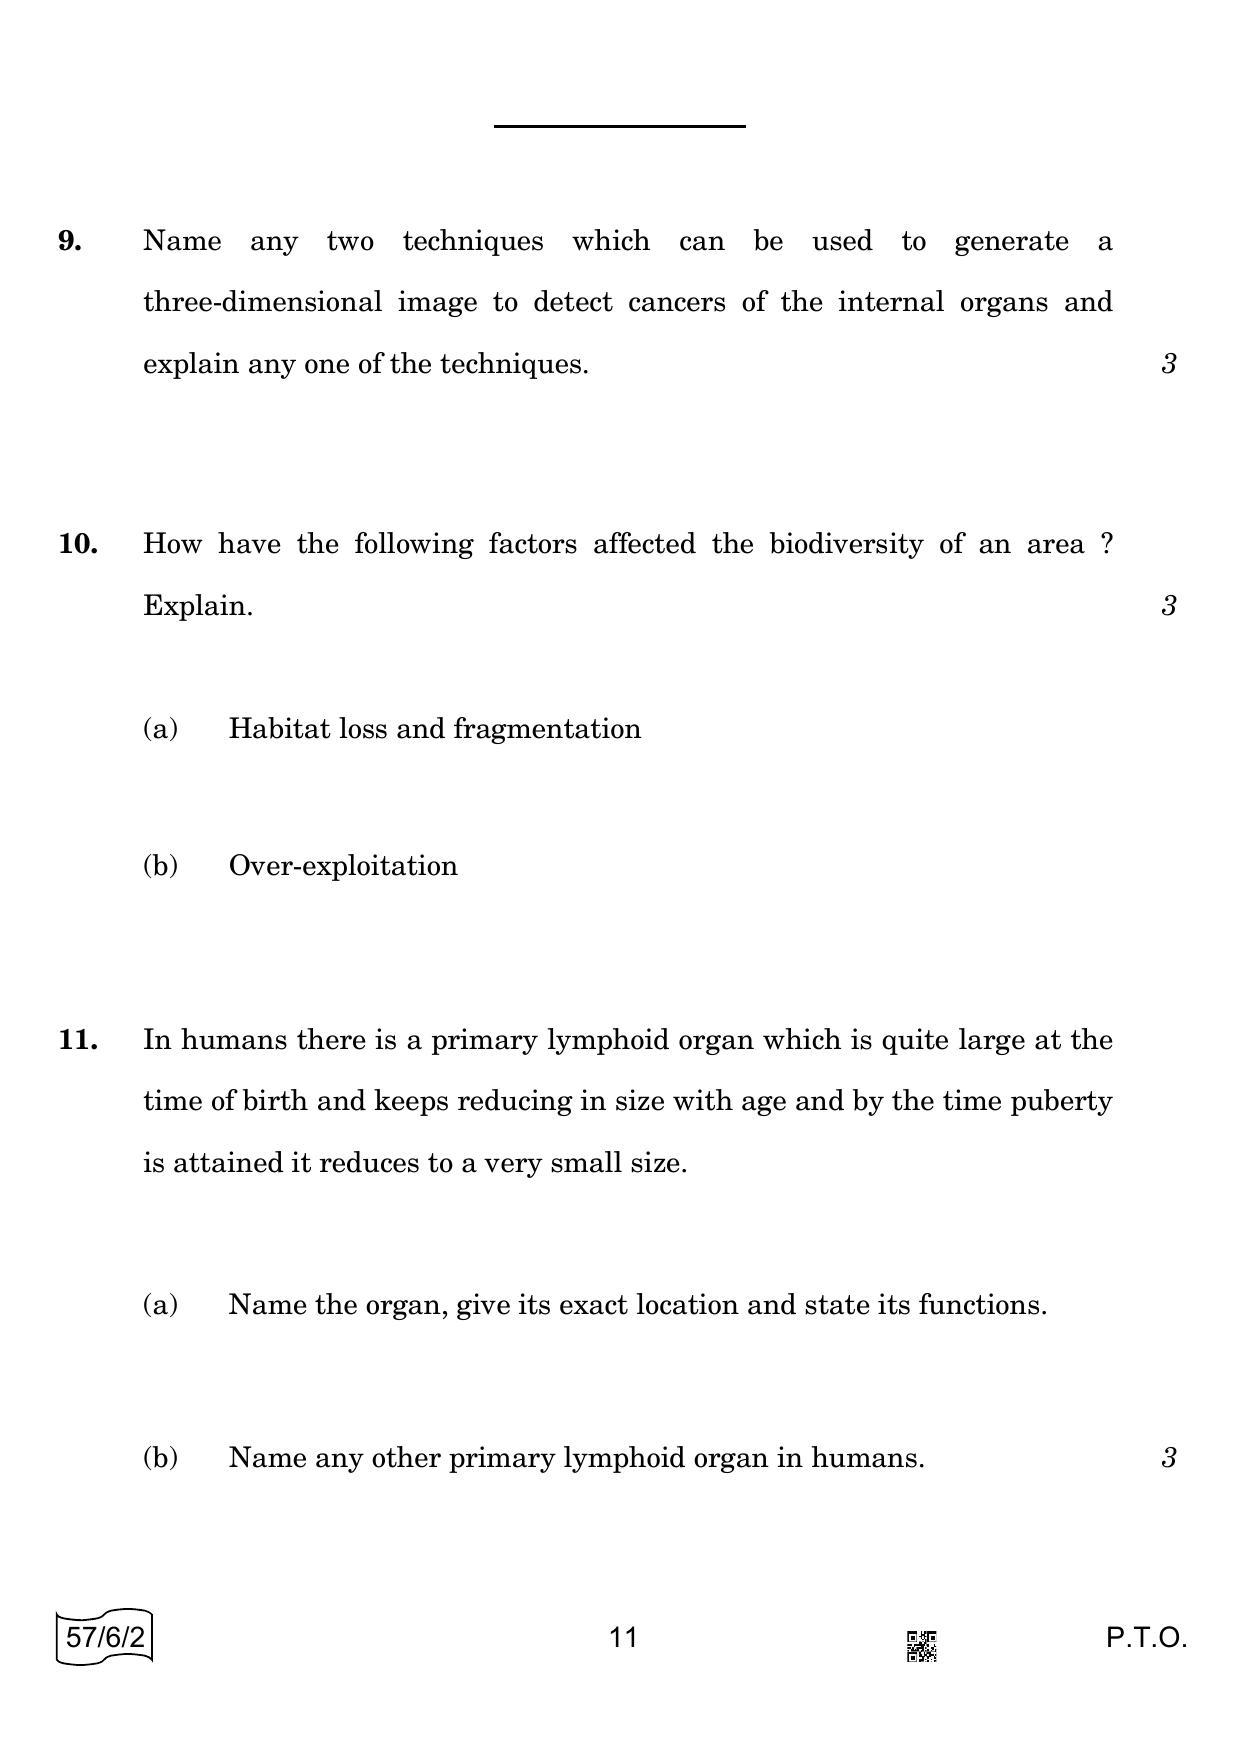 CBSE Class 12 57-6-2 BIOLOGY 2022 Compartment Question Paper - Page 11